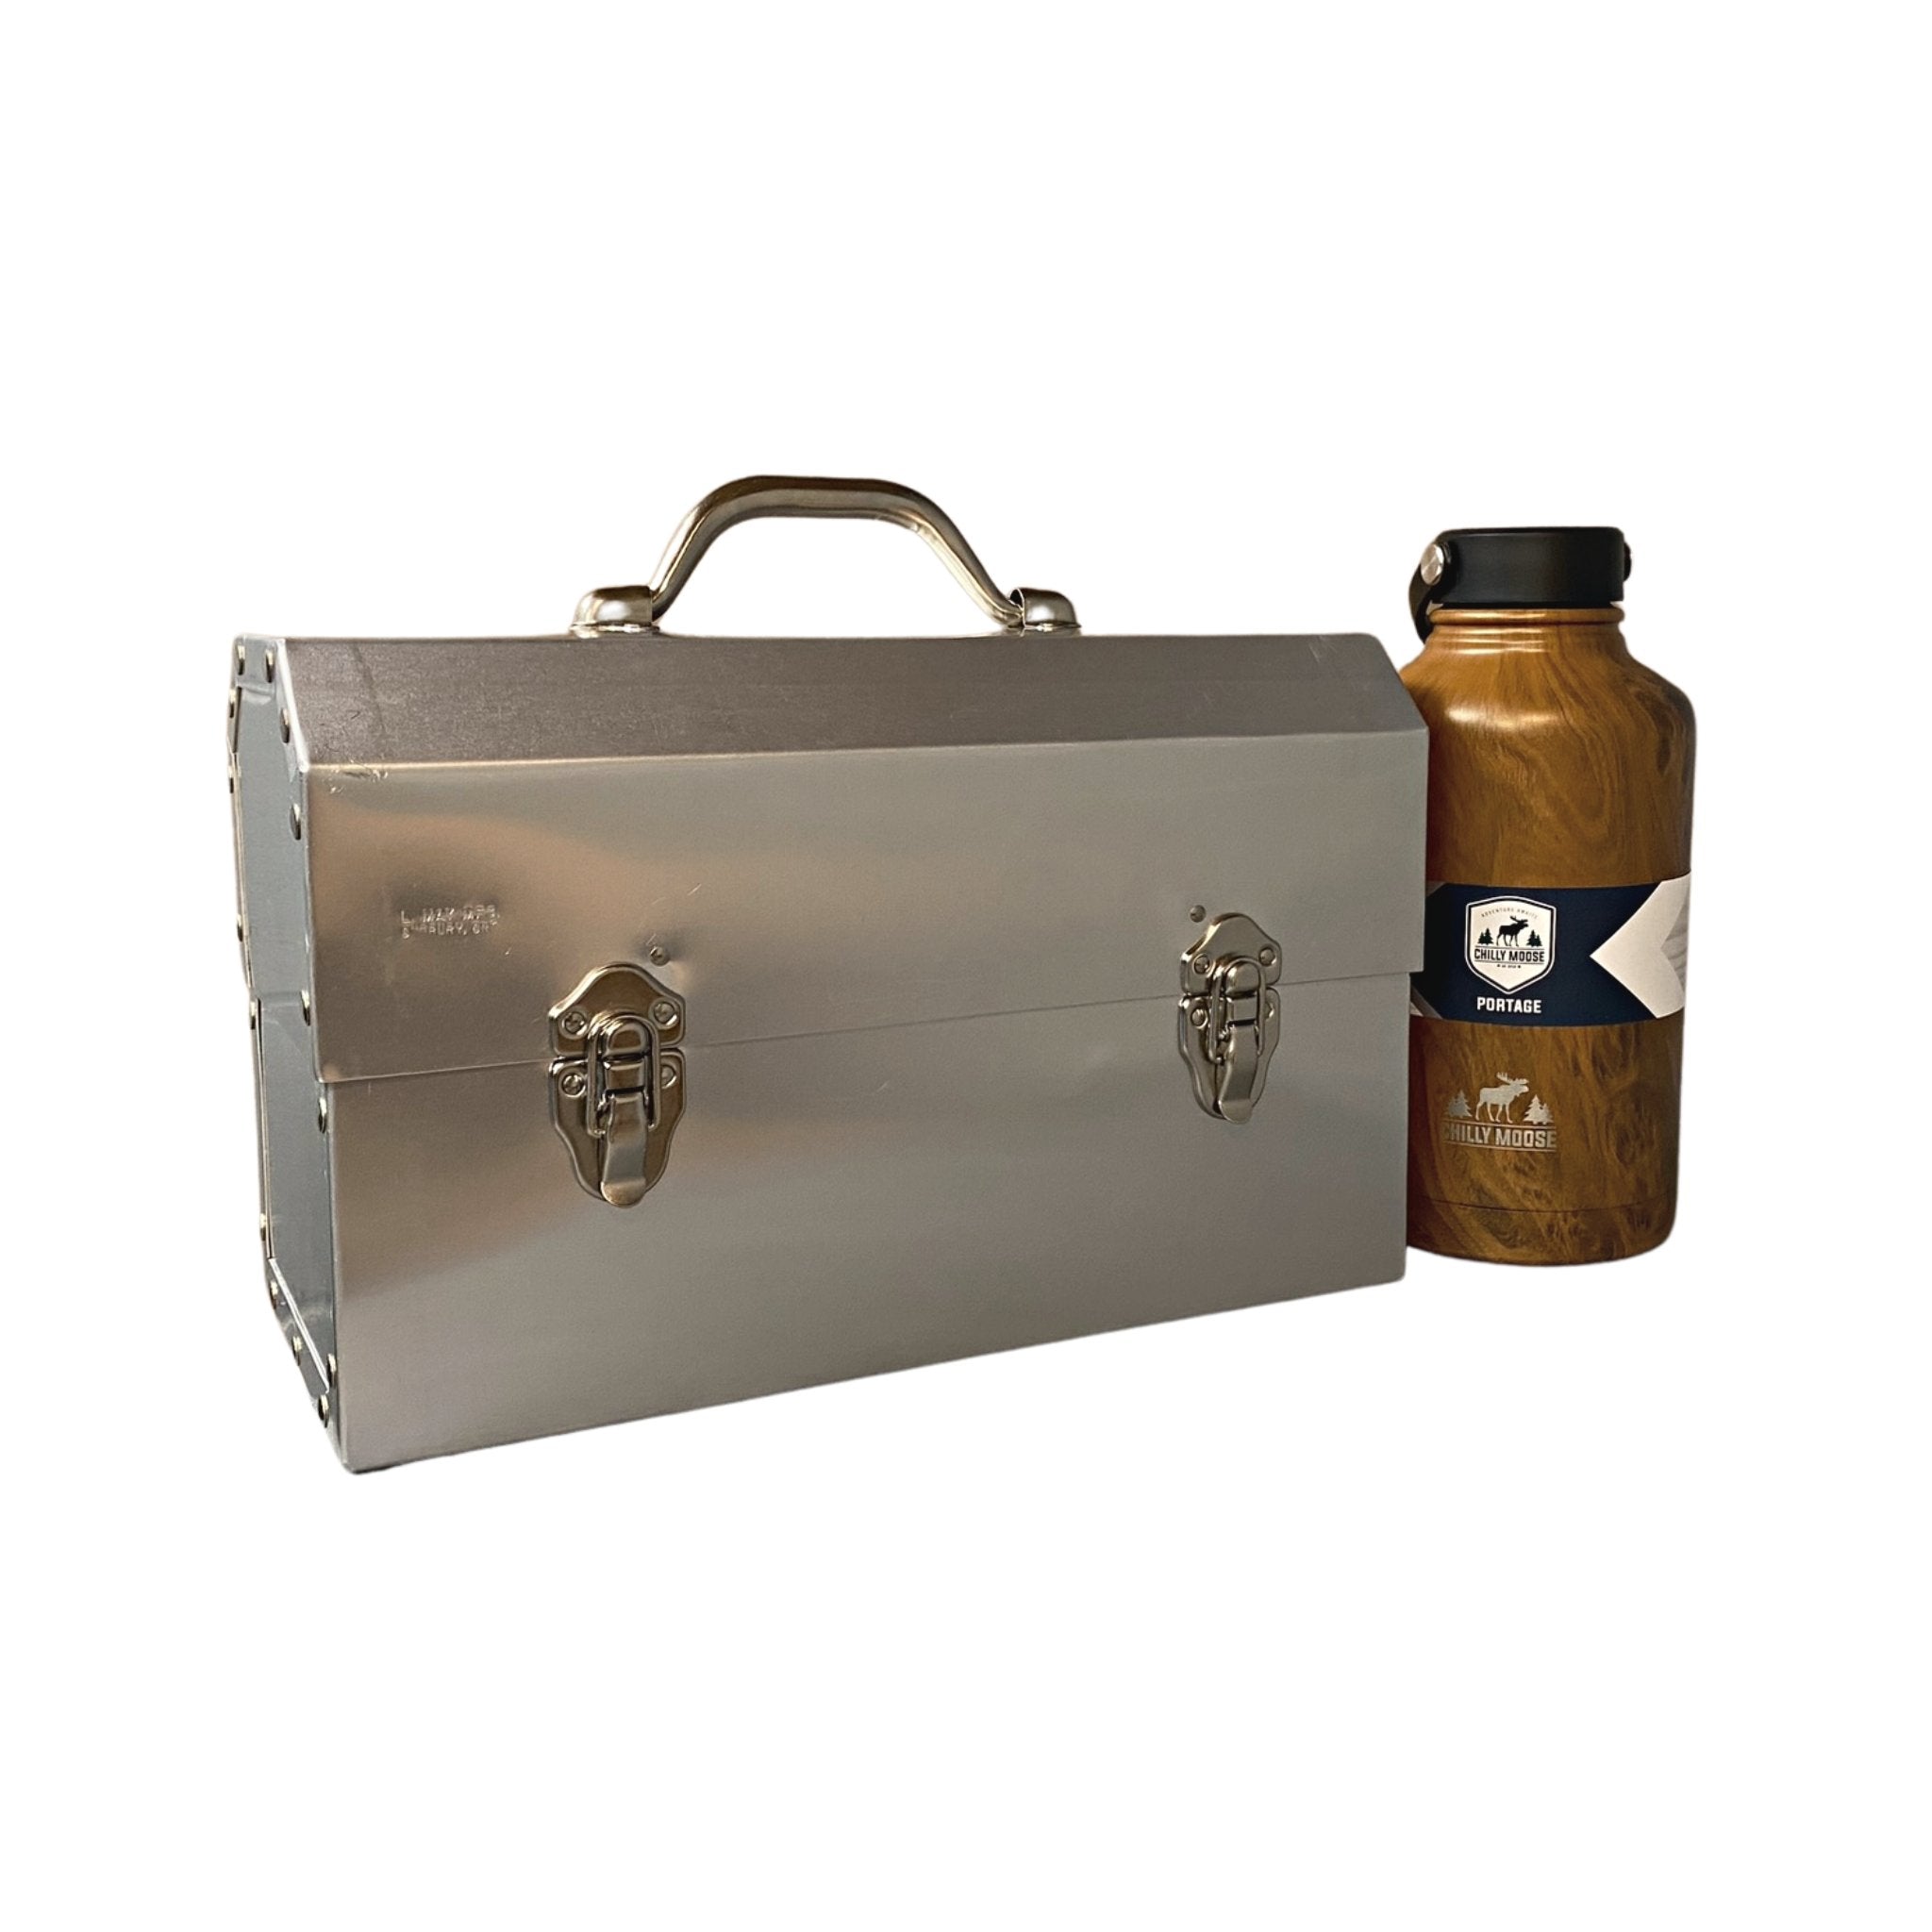 The Super Classic + 64oz Portage Canteen Woodland - The Miners LunchboxThe Miners Lunchbox